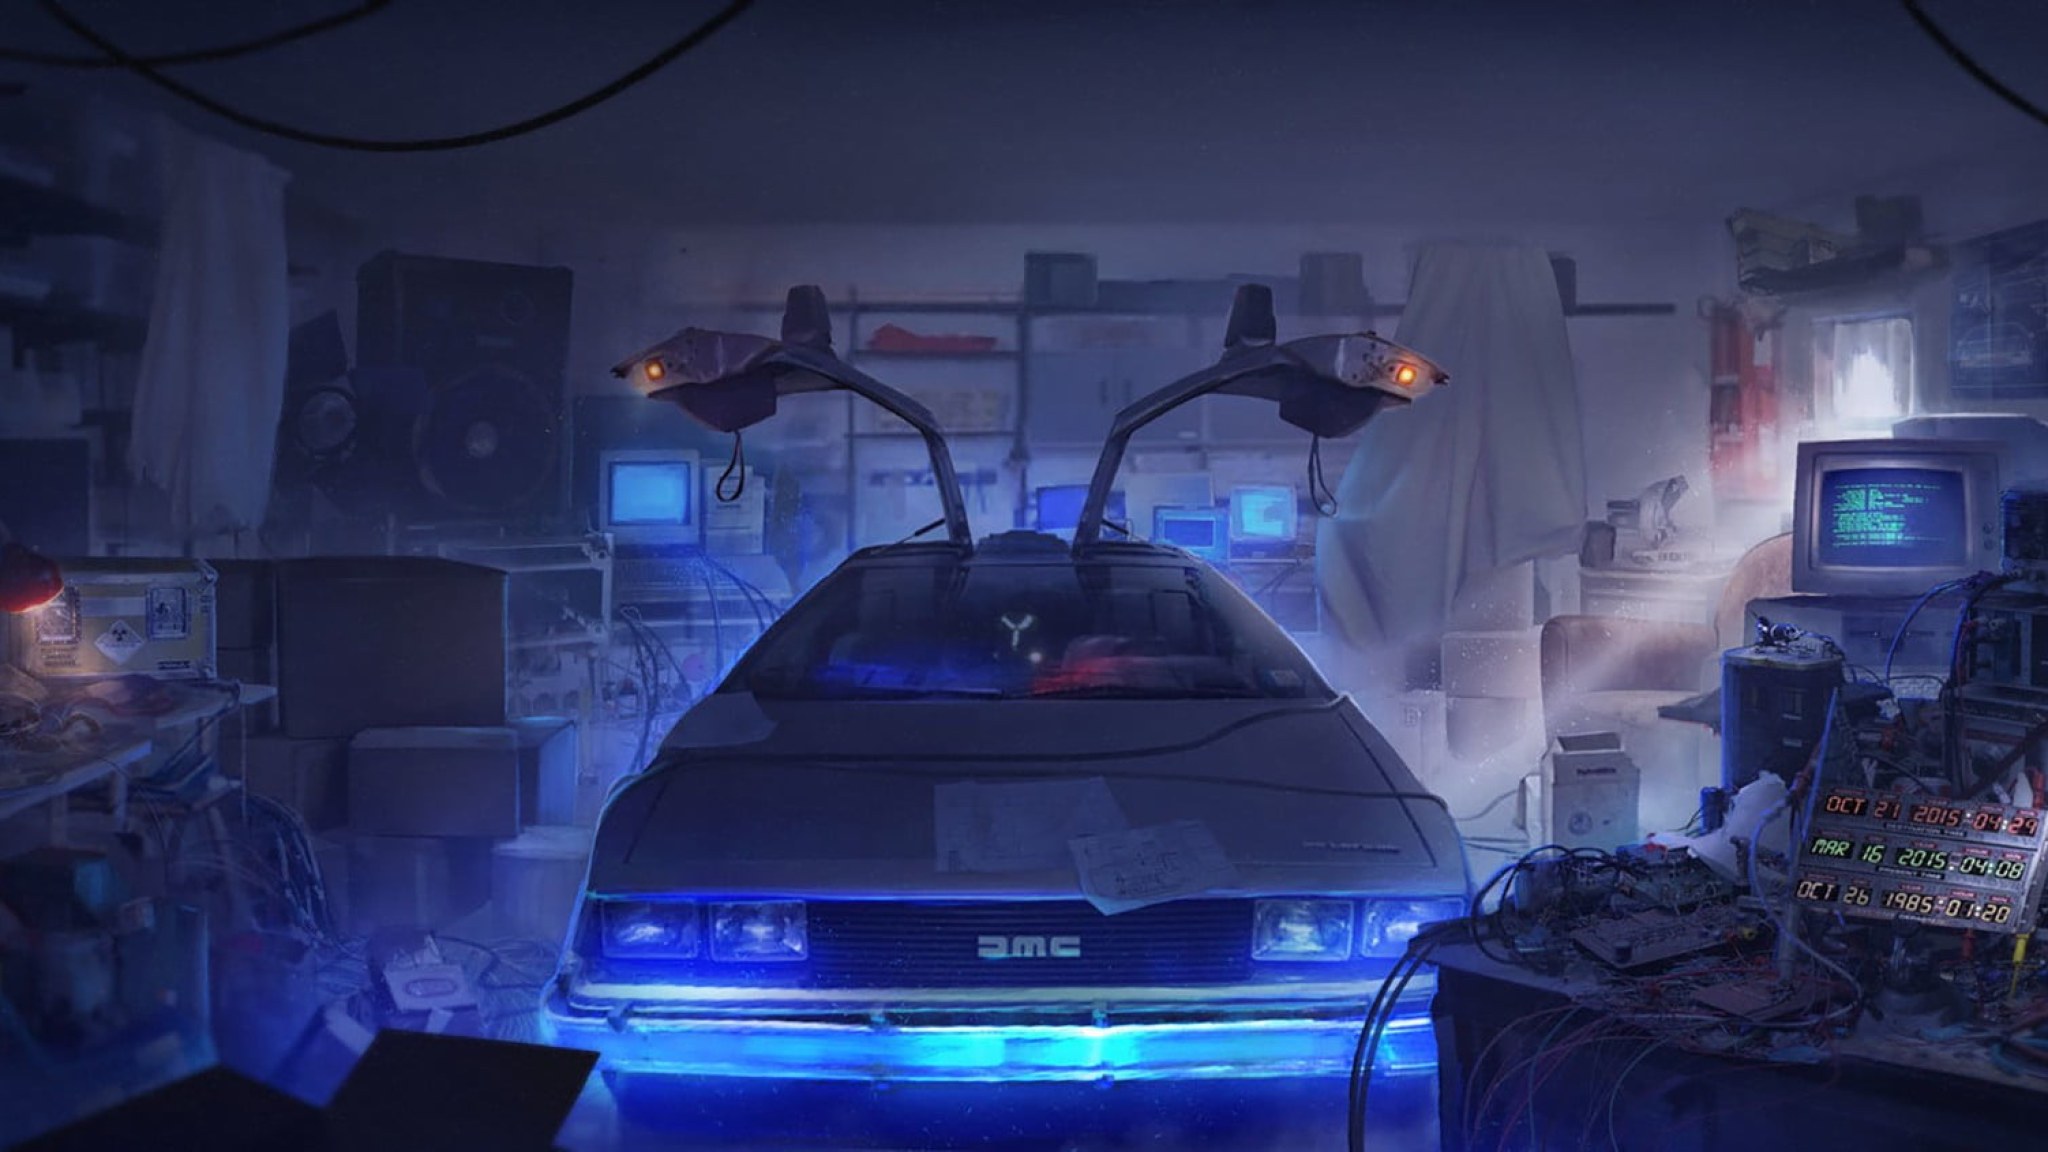 Back To The Future Delorean Car Illustration Wallpapers